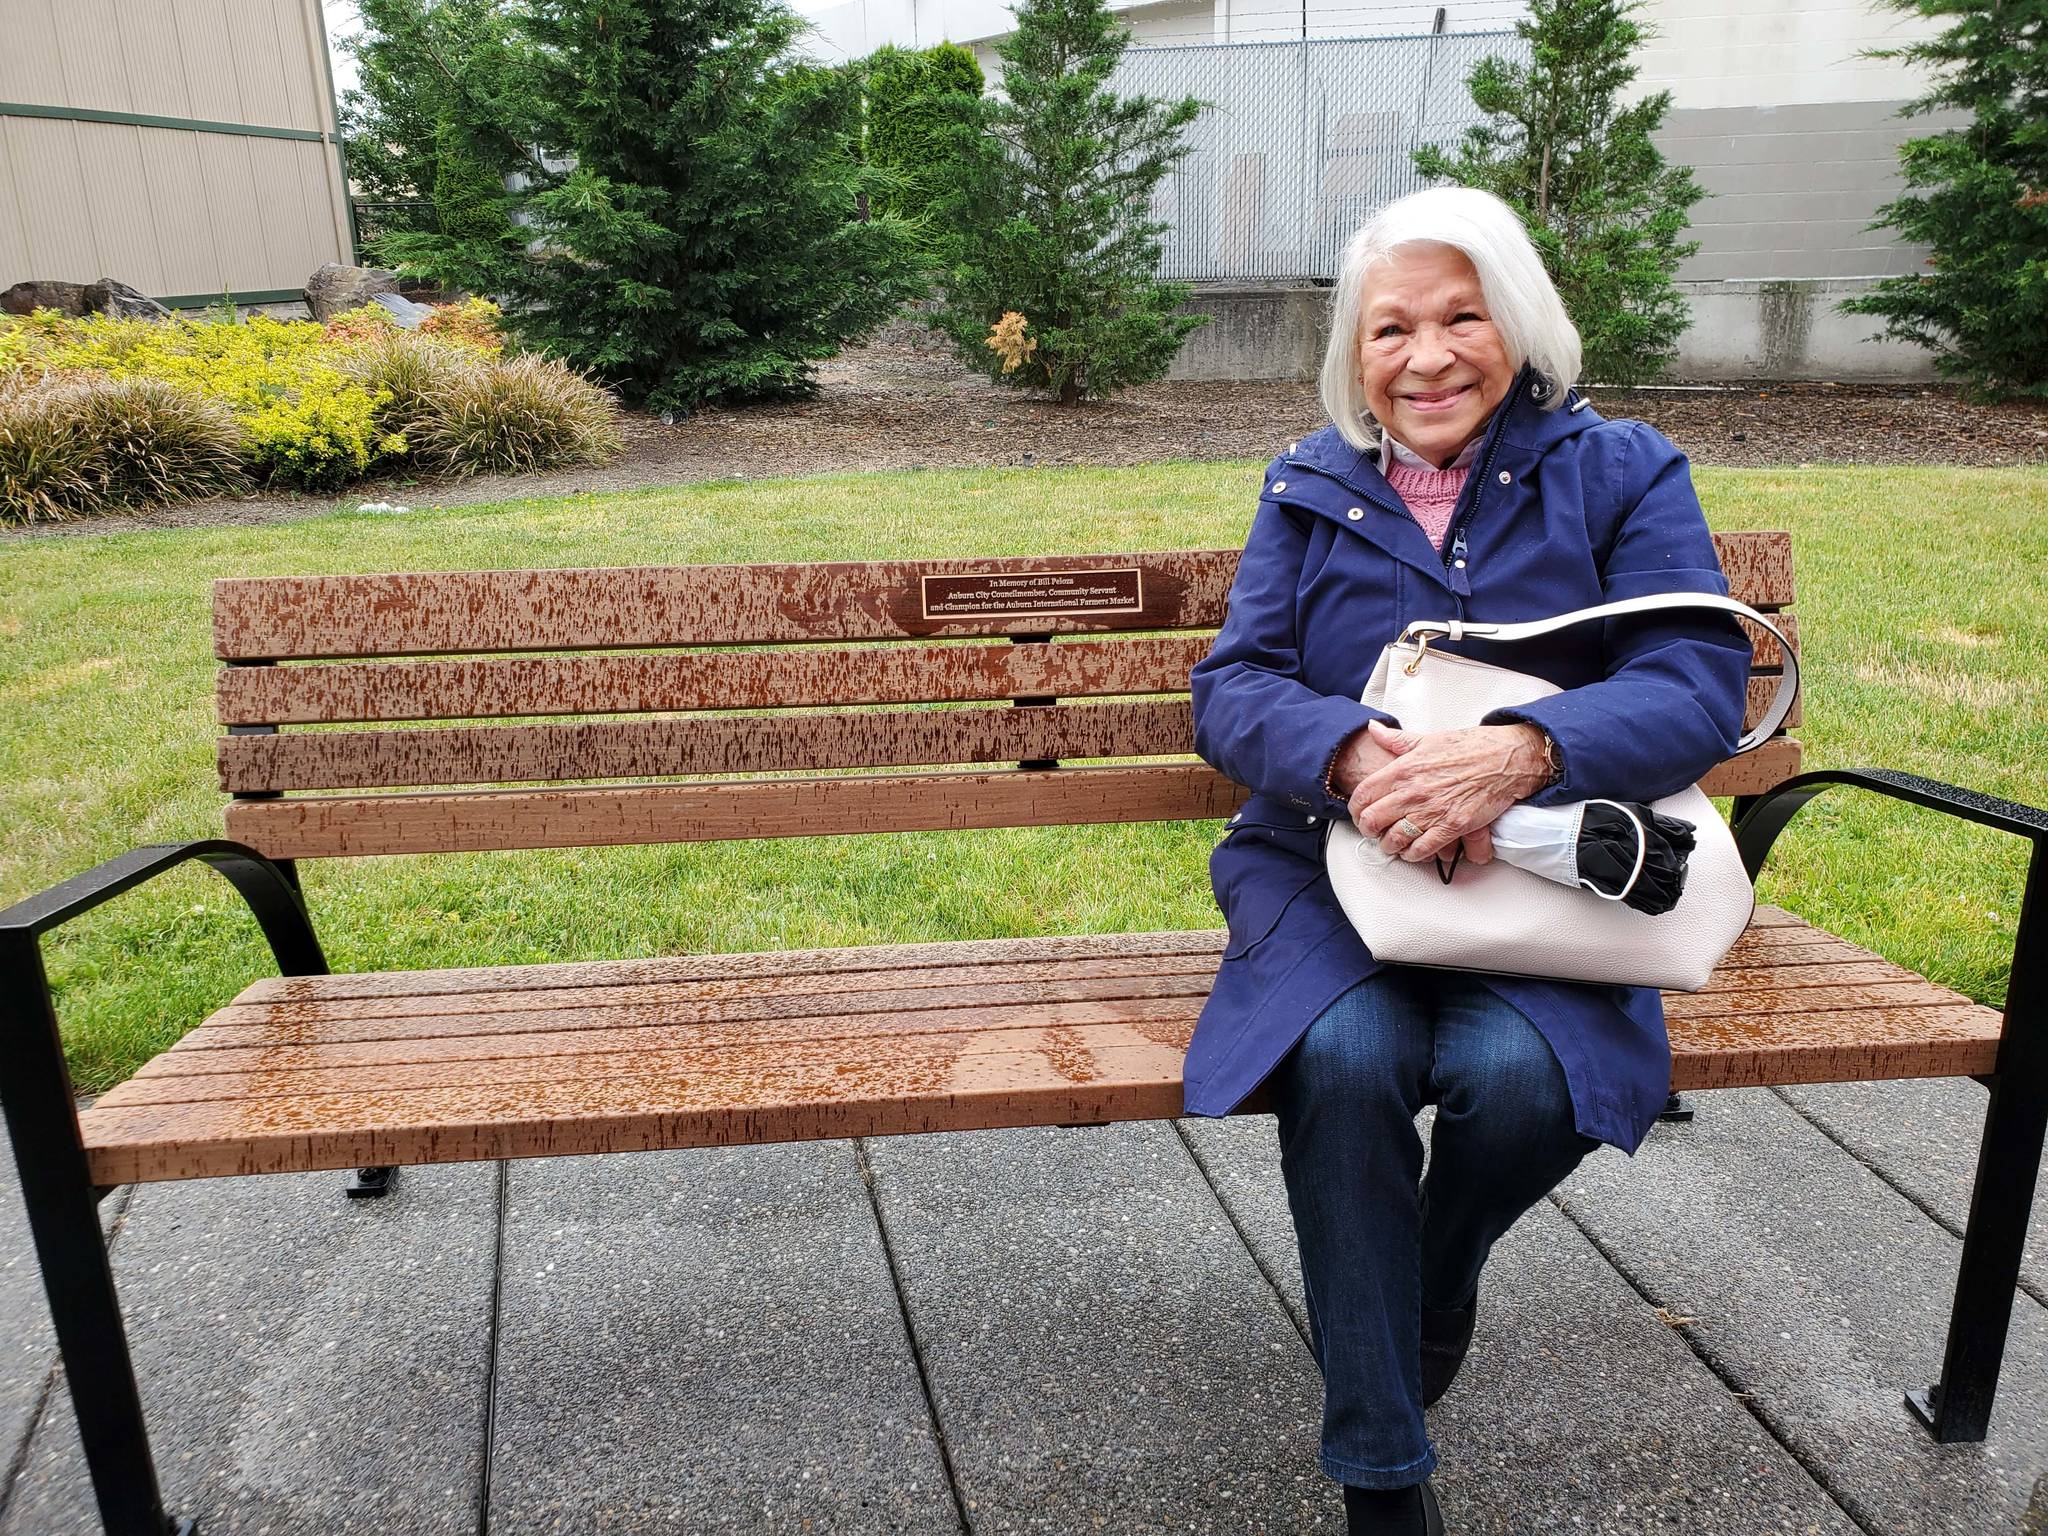 Joyce Peloza after the unveiling of a bench in honor of Bill Peloza. (Photo courtesy of city of Auburn)